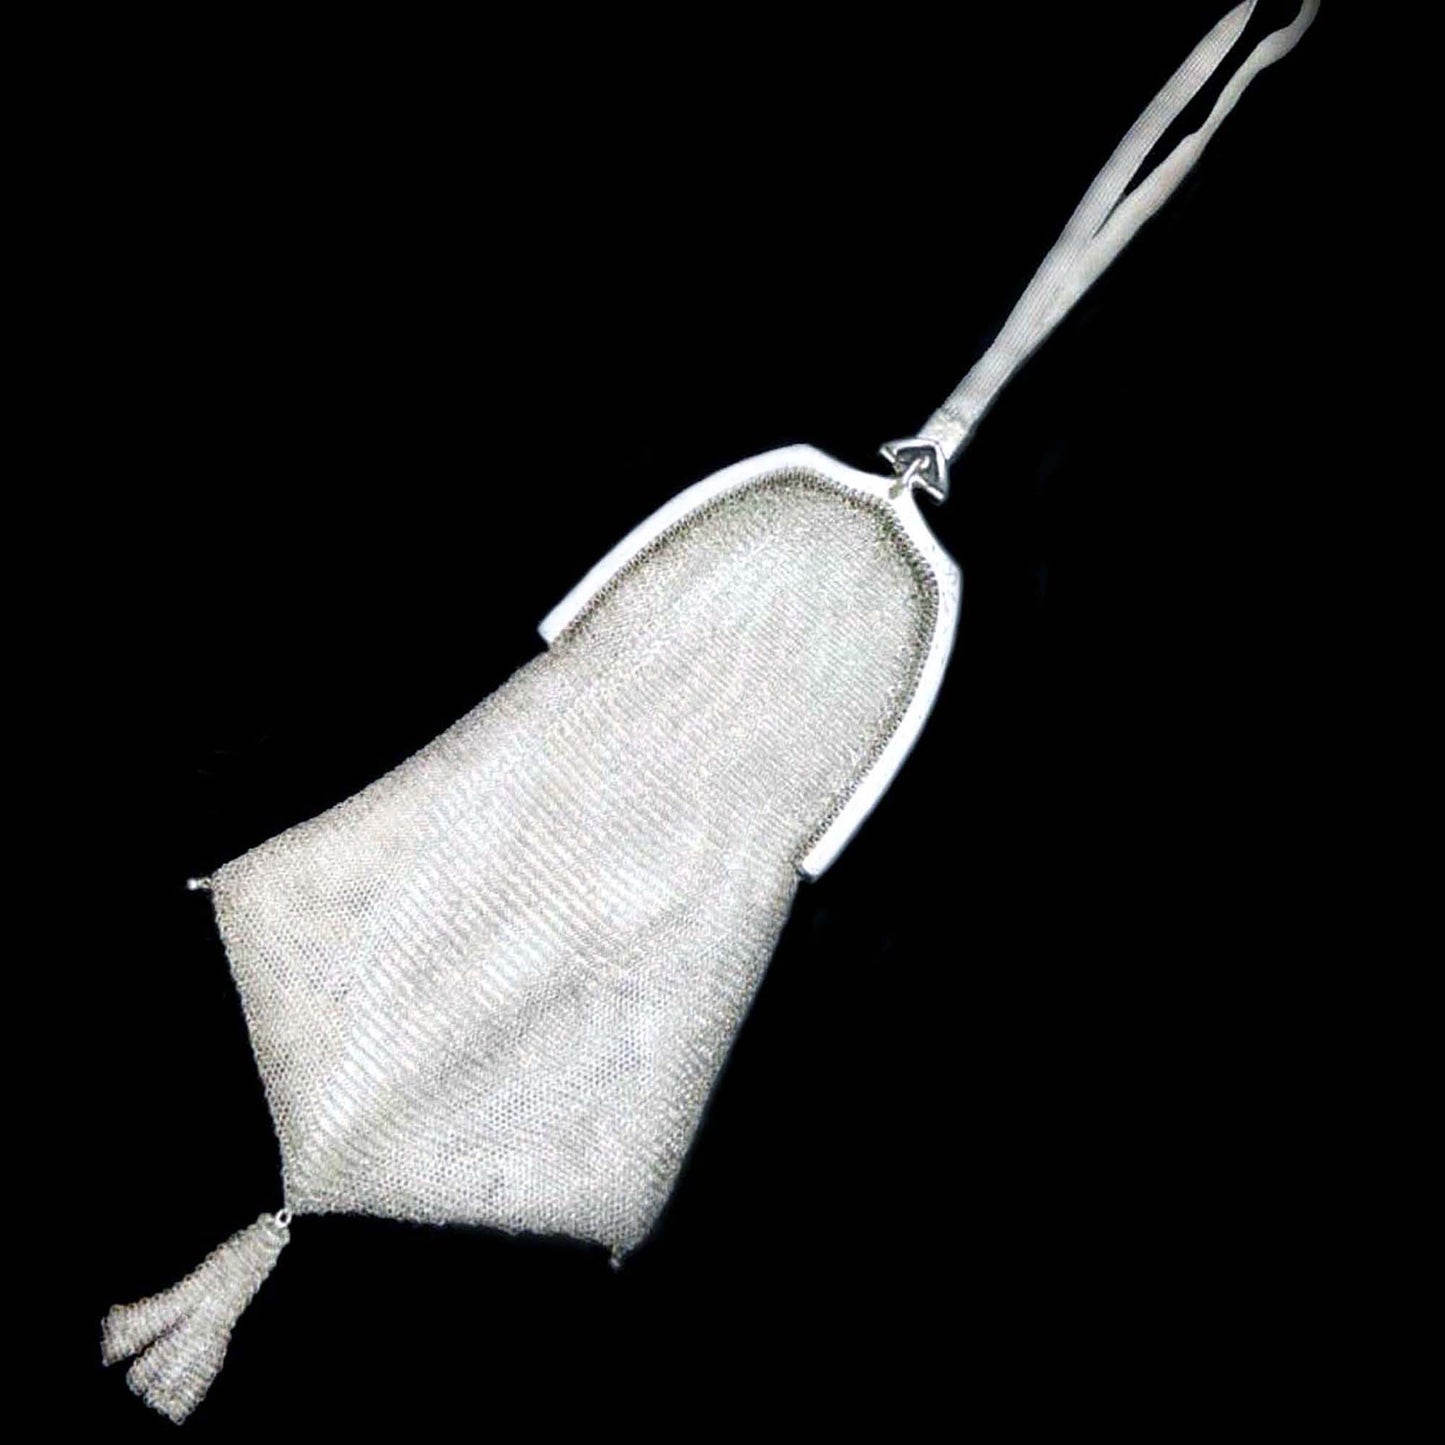 Antique Whiting & Davis Mesh Bag in Sterling Silver 1930s